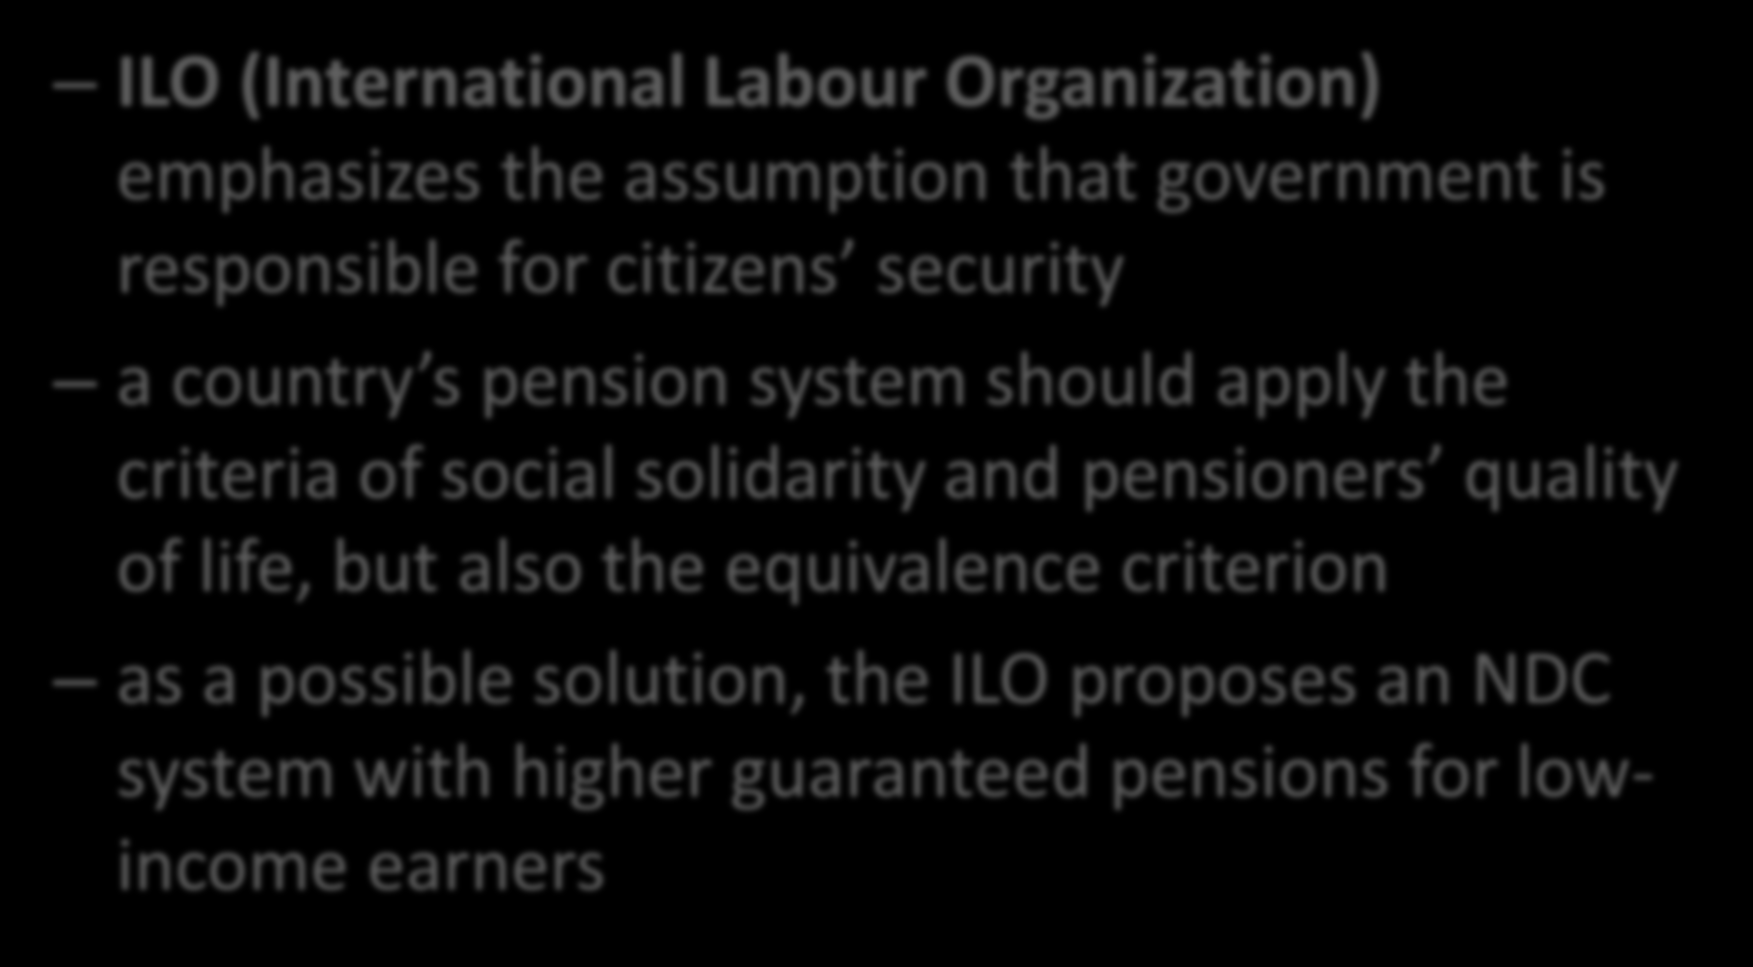 International Actor-Institutions ILO (International Labour Organization) emphasizes the assumption that government is responsible for citizens security a country s pension system should apply the